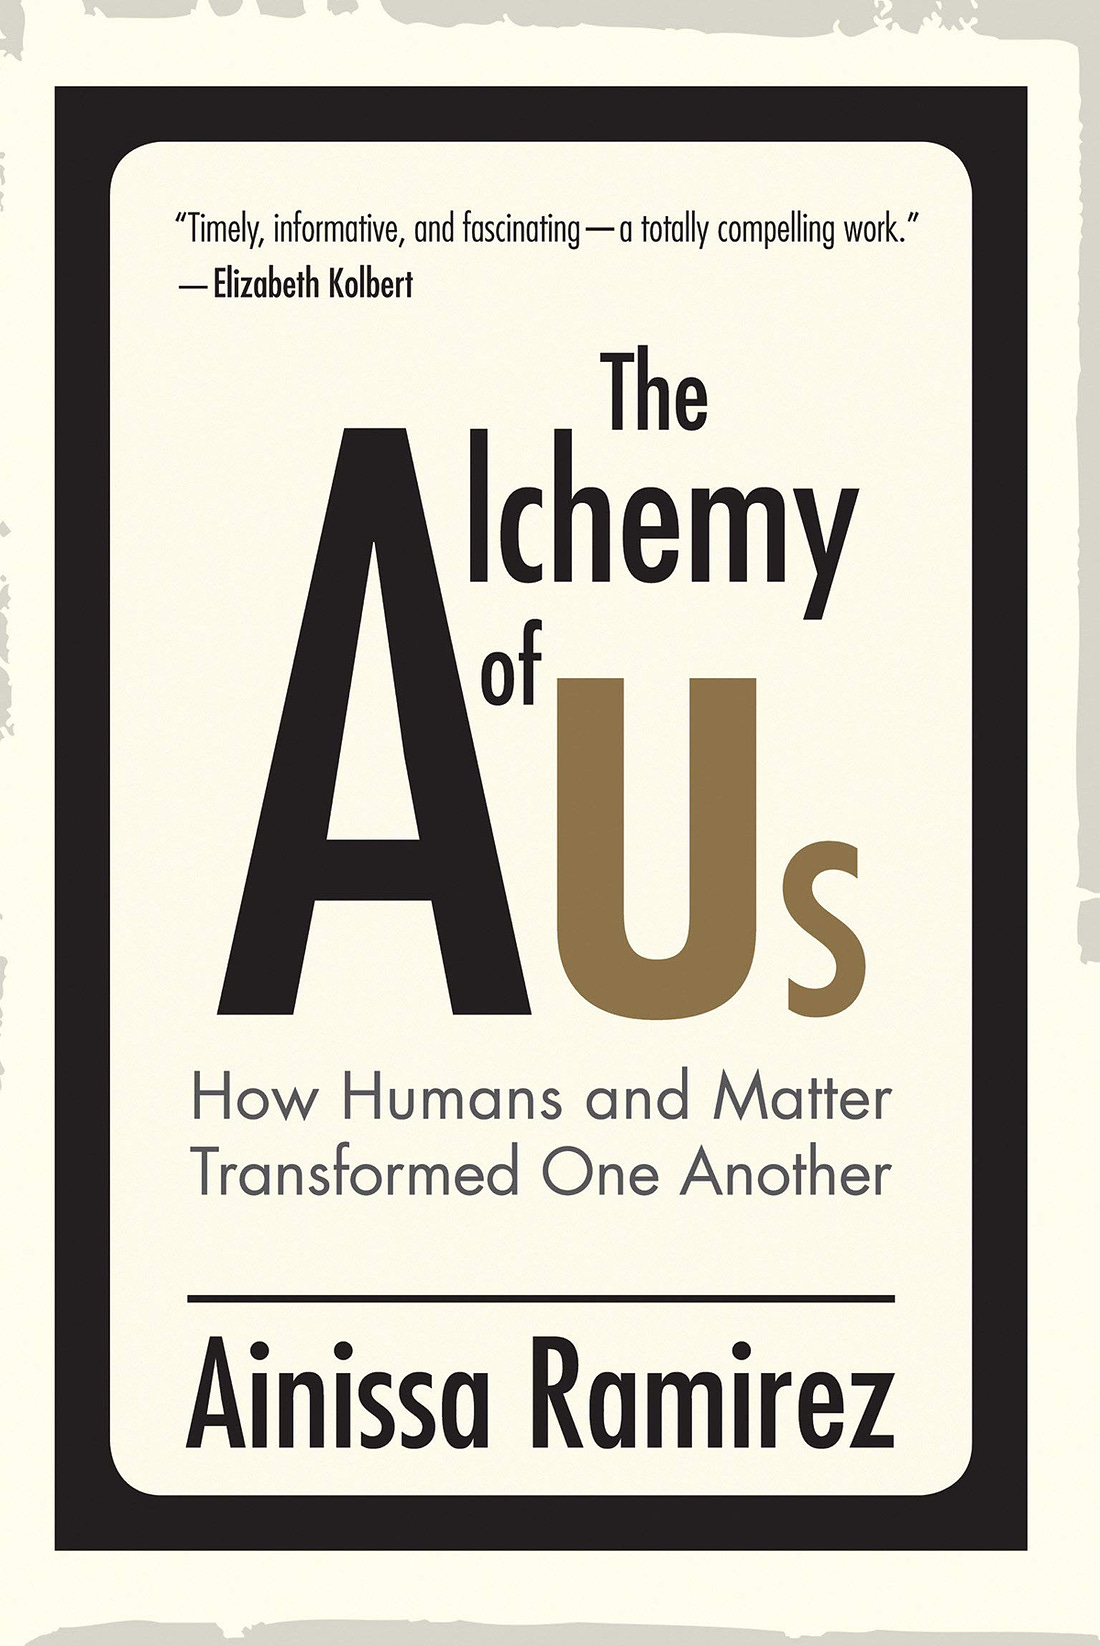 Amazon.com: The Alchemy of Us: How Humans and Matter Transformed One  Another (The MIT Press): 9780262043809: Ramirez, Ainissa: Books